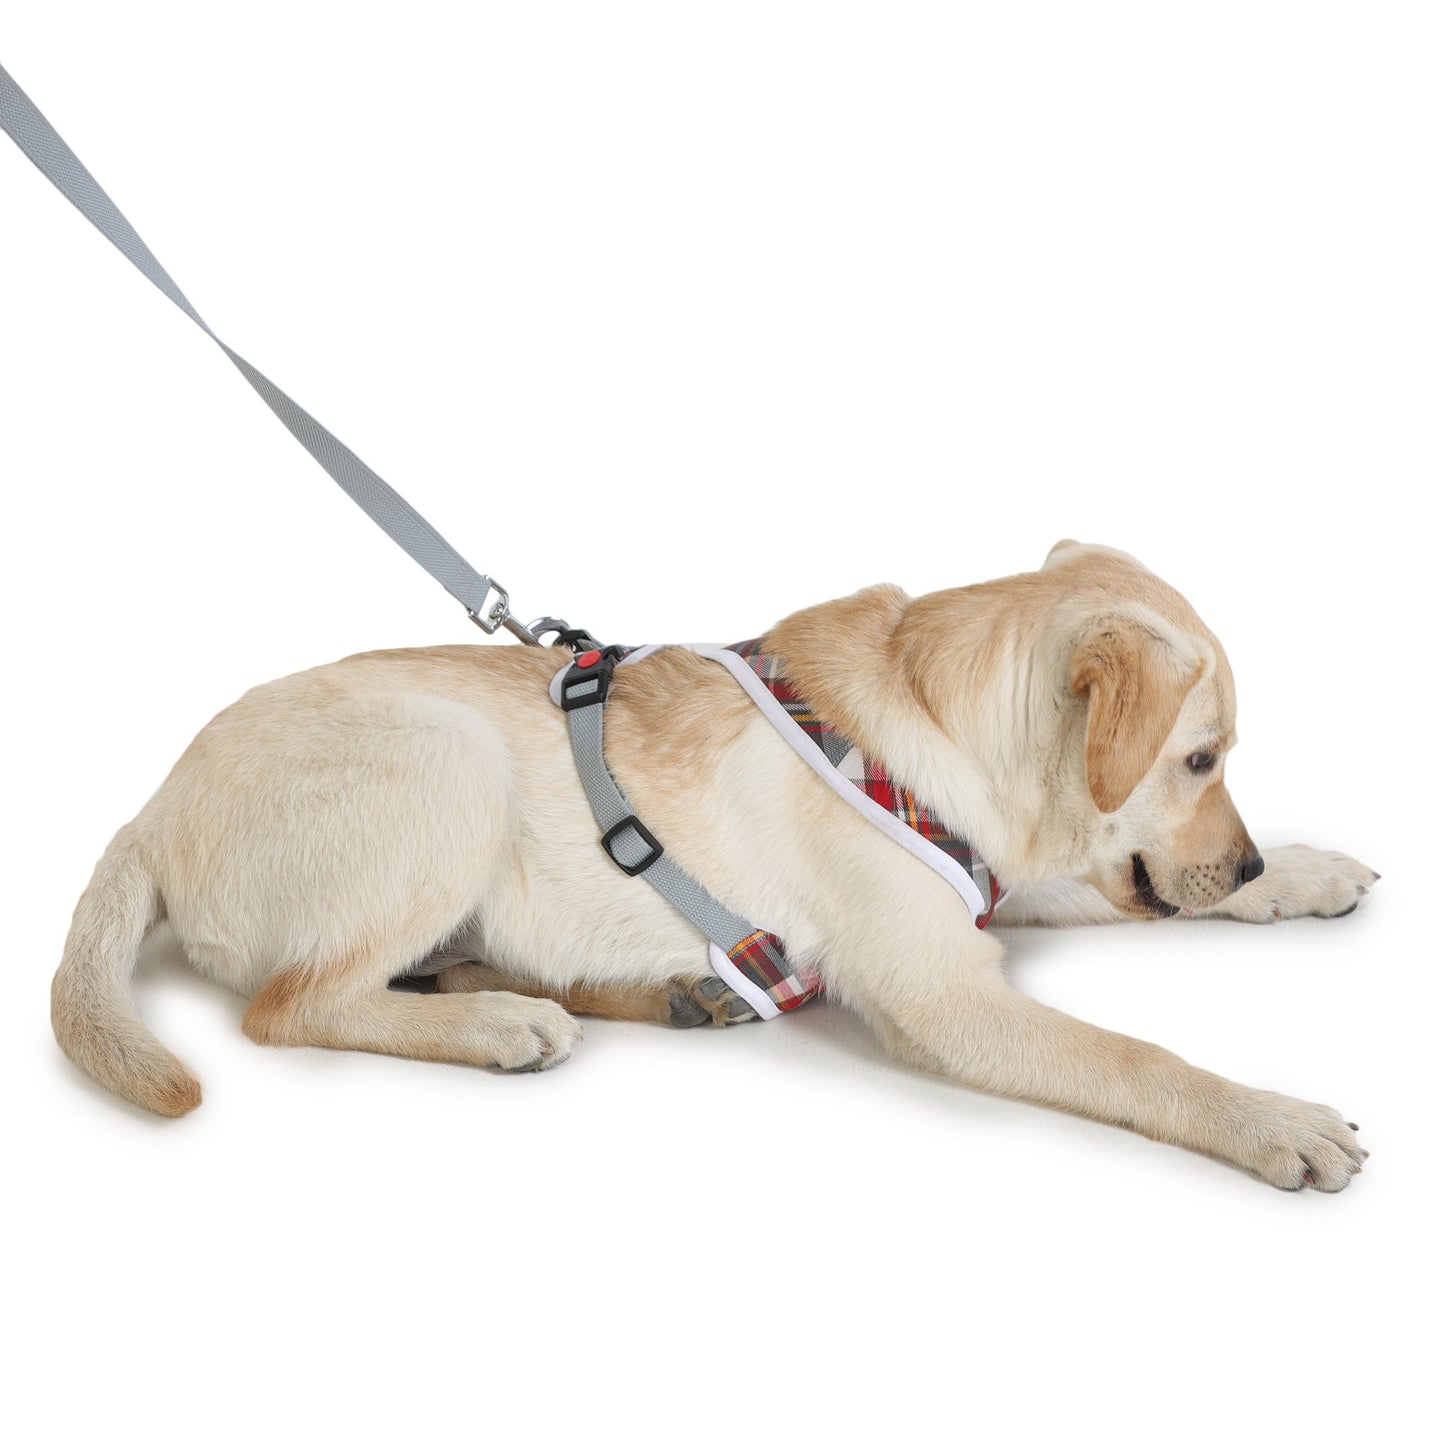 cute dog in harness by Barks & Wags